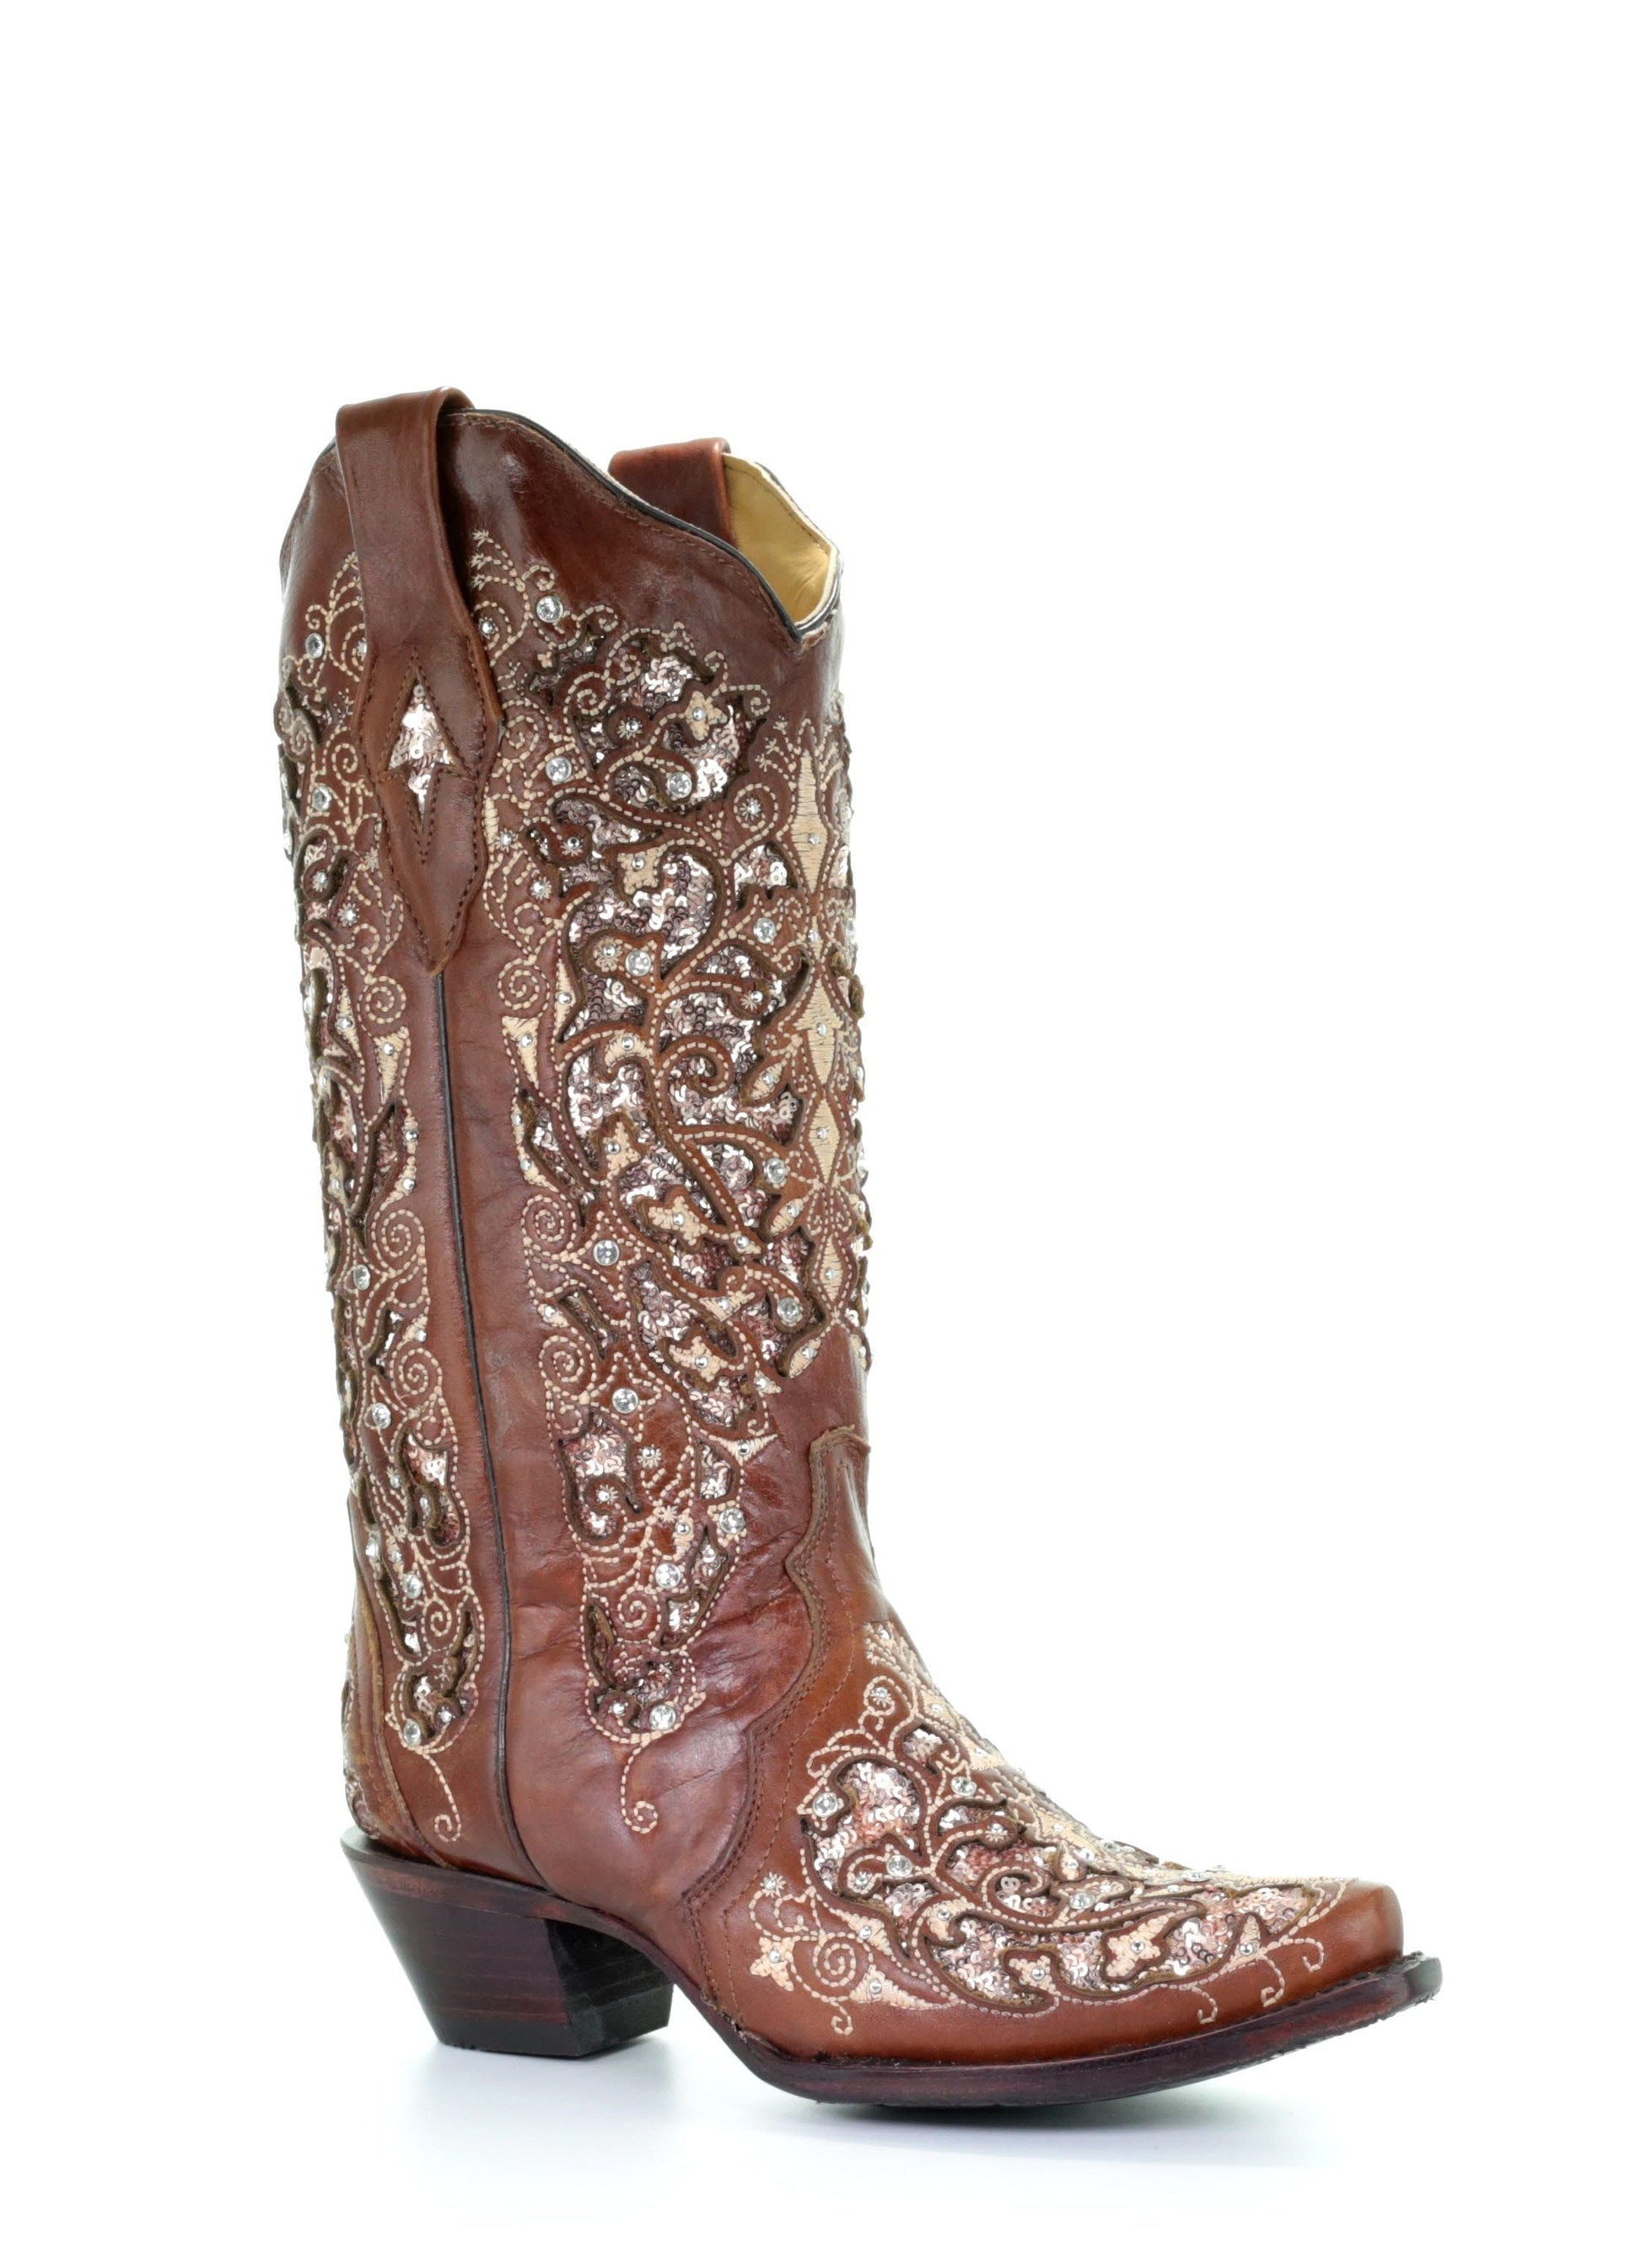 A3671 - Corral brown western cowgirl leather boots for women-Kuet.us